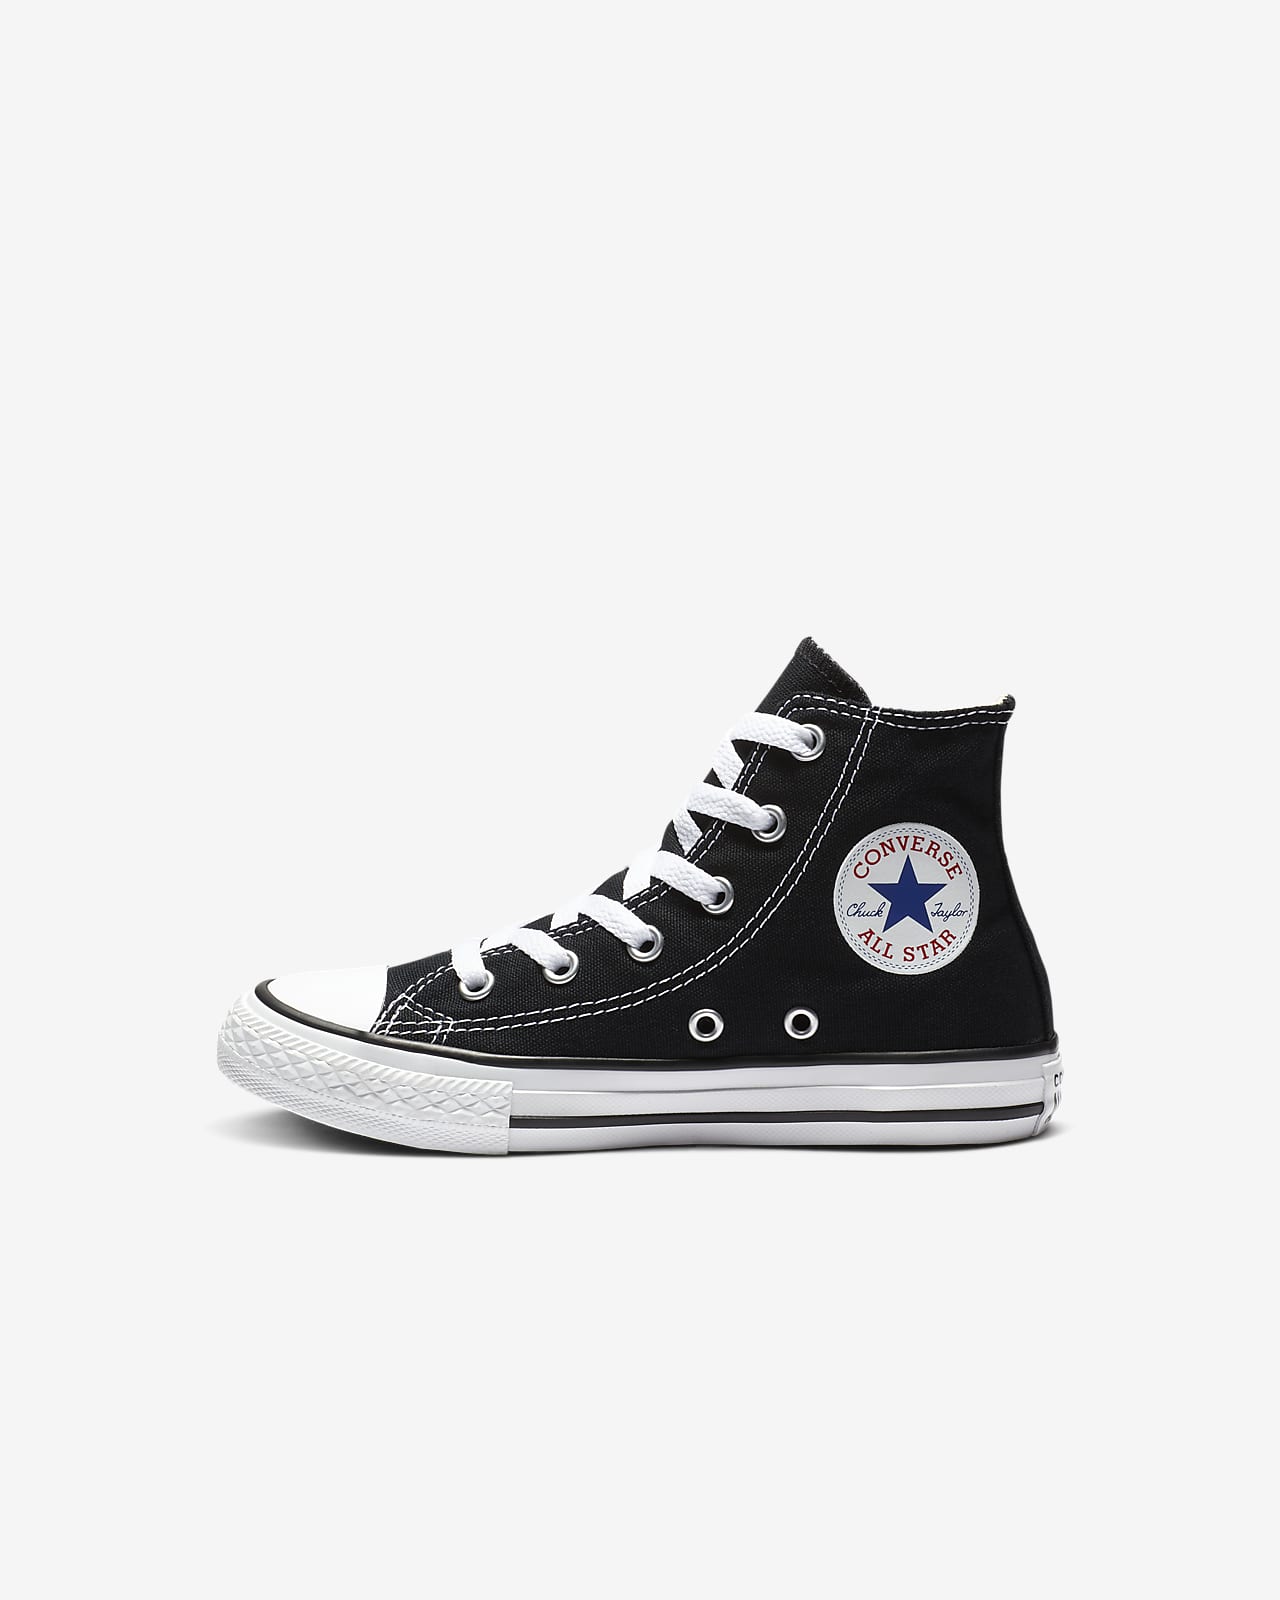 pretend Endless Appeal to be attractive Converse Chuck Taylor All Star High Top Little Kids' Shoes. Nike.com